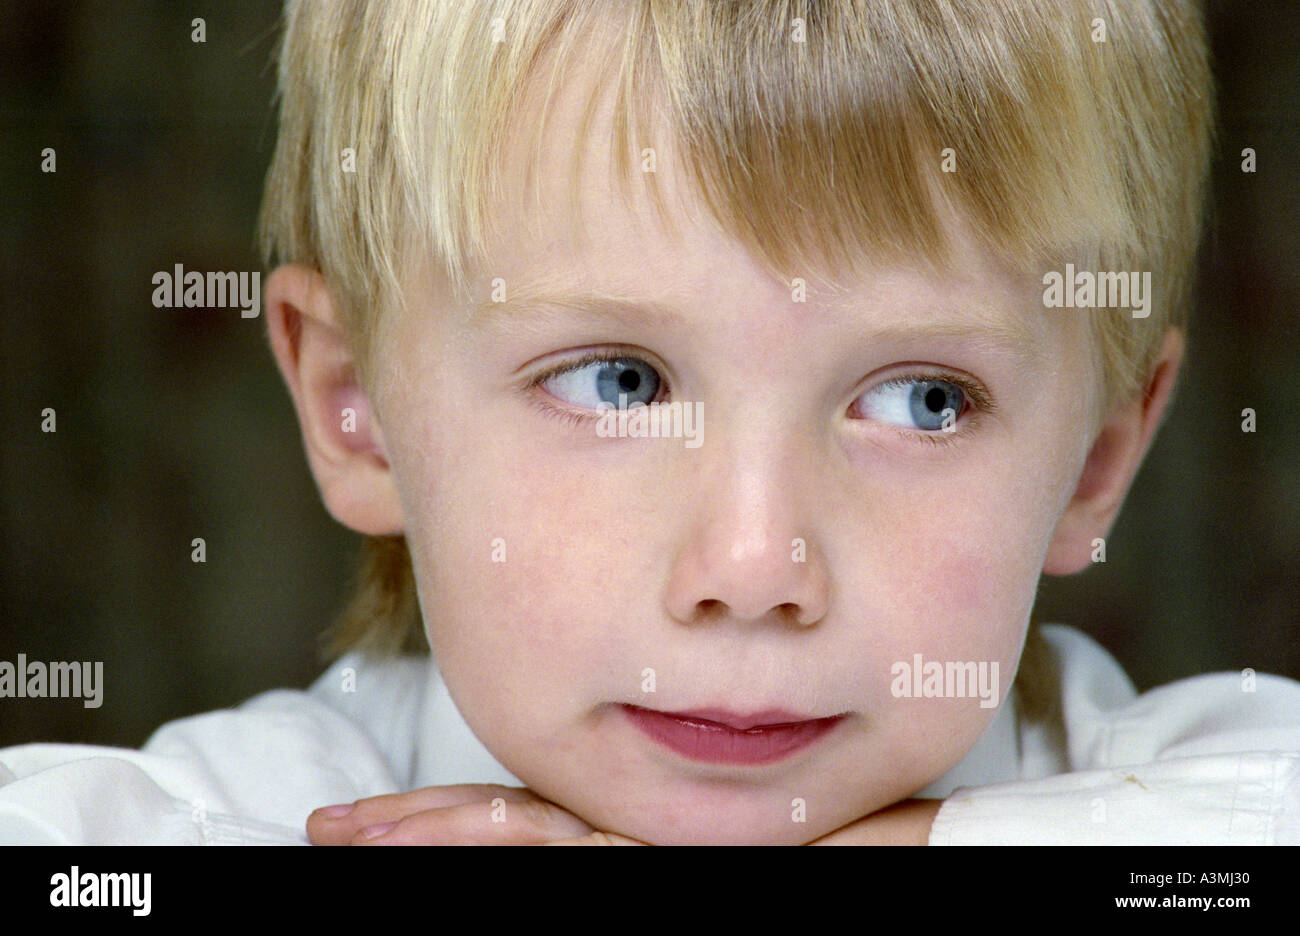 Young boy blue eyes and blond hair with fringe Stock Photo - Alamy